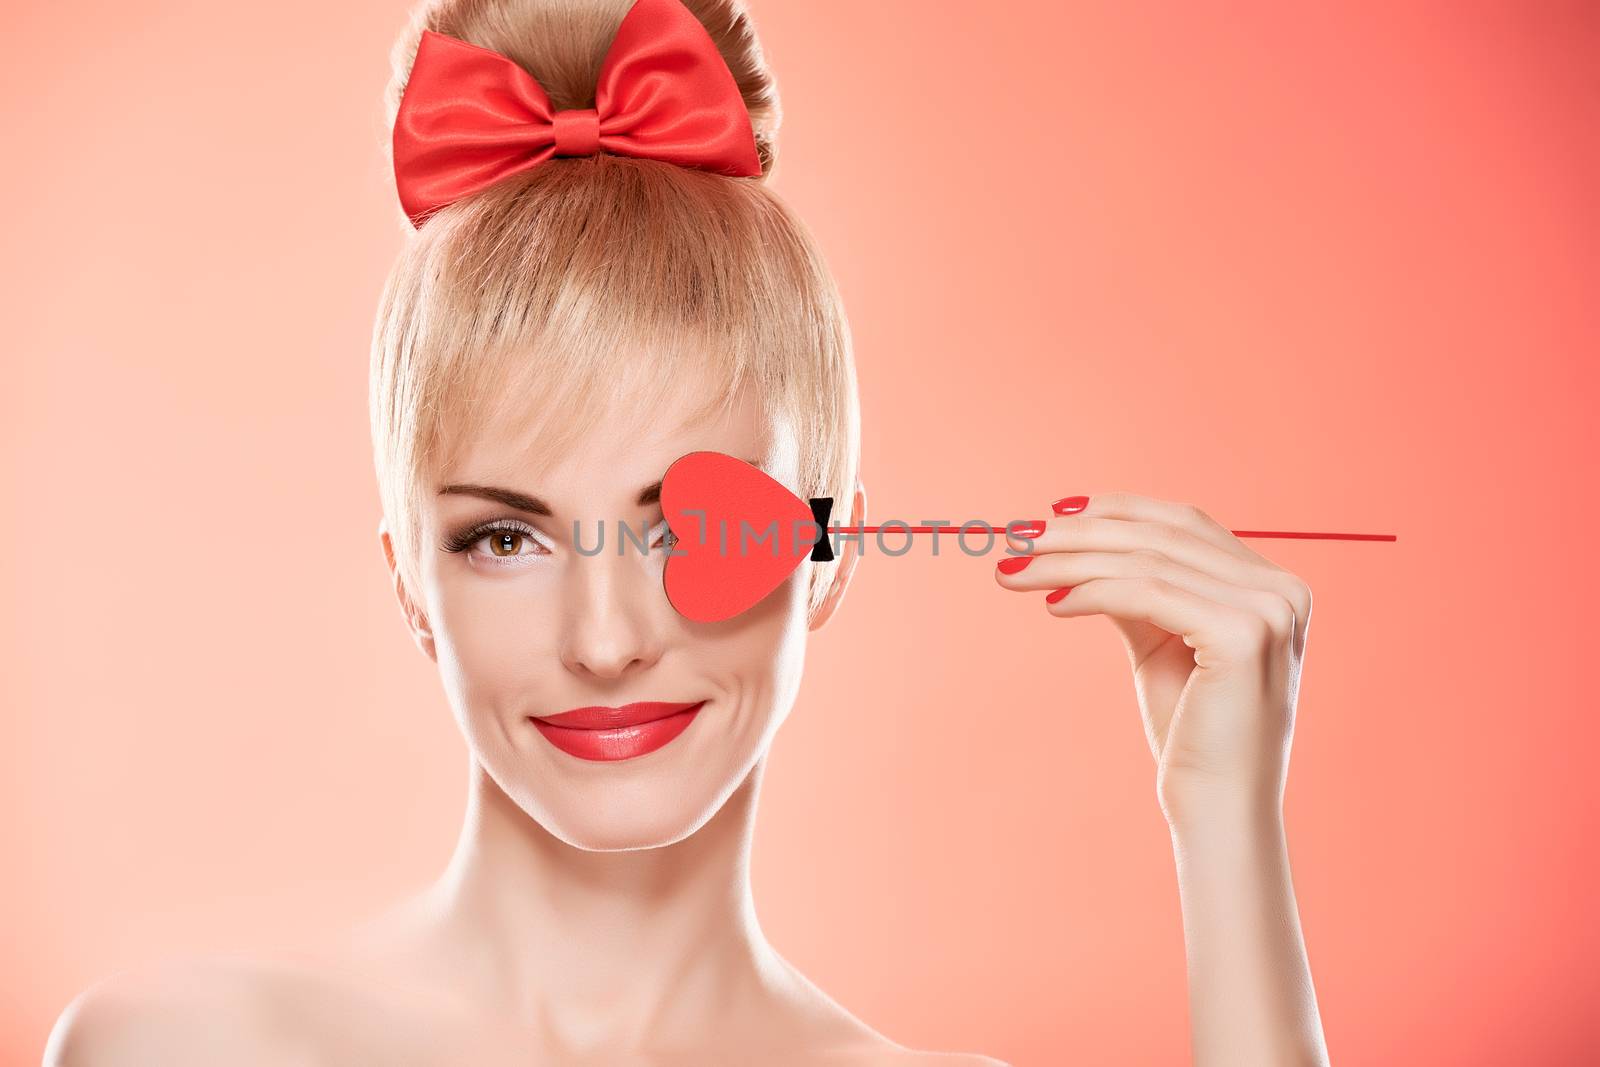 Beauty fashion portrait woman smiling with red heart. Valentines Day, love. Sensual attractive pretty nude blonde sexy girl, Pinup hairstyle, bow. Unusual emotional playful. Romantic, retro vintage 